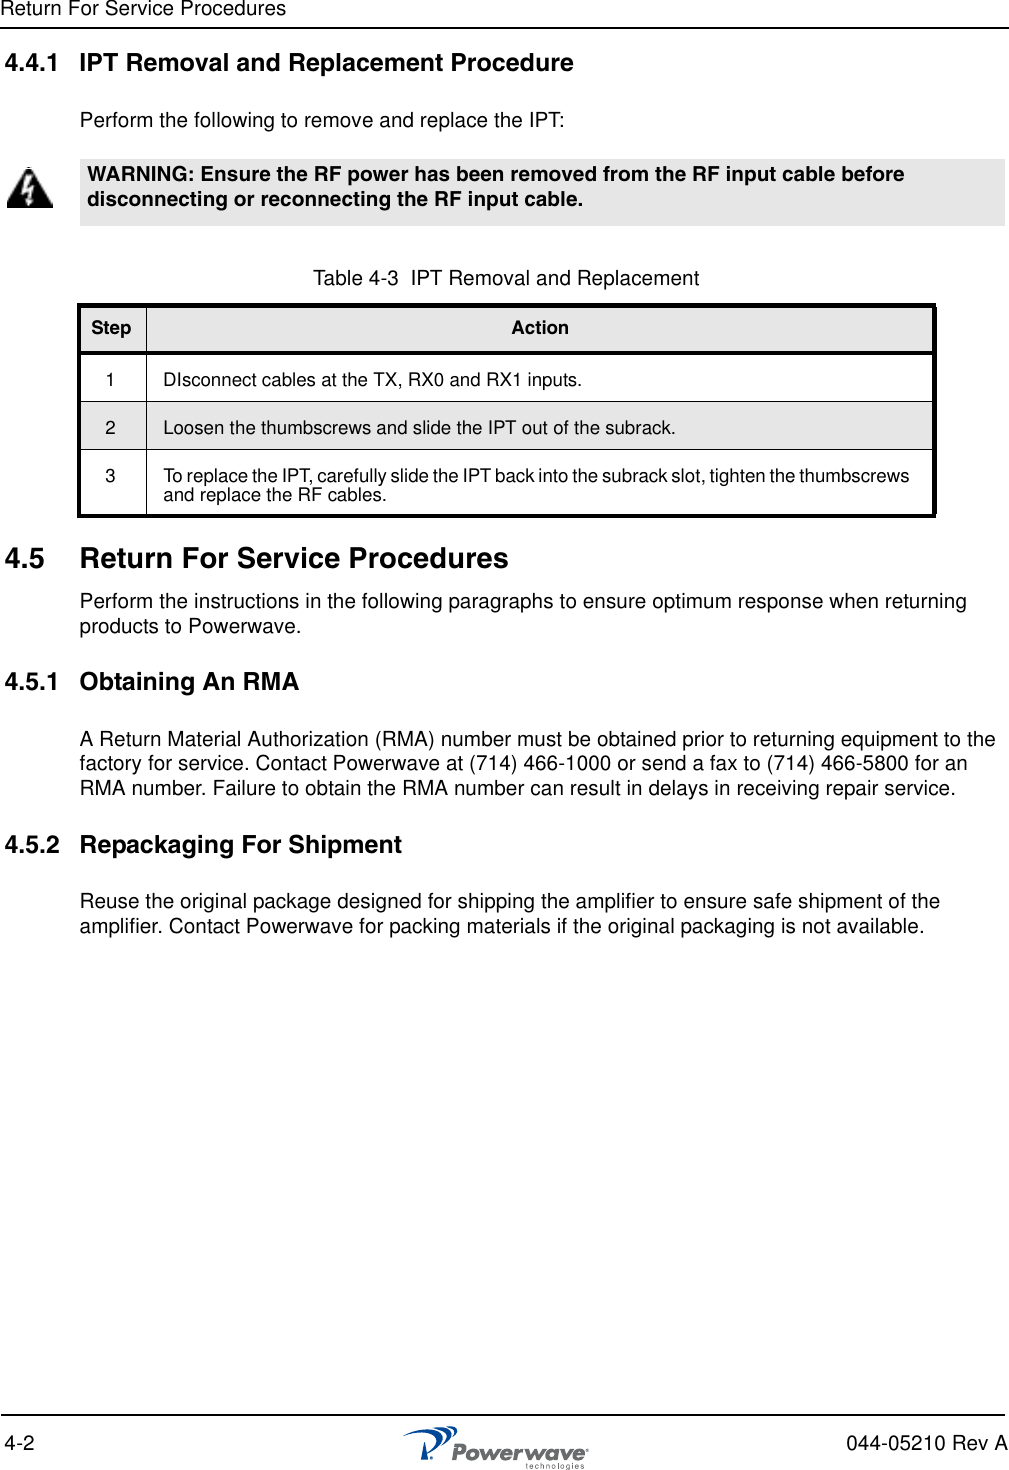 Return For Service Procedures4-2 044-05210 Rev A4.4.1 IPT Removal and Replacement ProcedurePerform the following to remove and replace the IPT:4.5 Return For Service ProceduresPerform the instructions in the following paragraphs to ensure optimum response when returning products to Powerwave.4.5.1 Obtaining An RMAA Return Material Authorization (RMA) number must be obtained prior to returning equipment to the factory for service. Contact Powerwave at (714) 466-1000 or send a fax to (714) 466-5800 for an RMA number. Failure to obtain the RMA number can result in delays in receiving repair service.4.5.2 Repackaging For ShipmentReuse the original package designed for shipping the amplifier to ensure safe shipment of the amplifier. Contact Powerwave for packing materials if the original packaging is not available.WARNING: Ensure the RF power has been removed from the RF input cable before disconnecting or reconnecting the RF input cable.Table 4-3  IPT Removal and Replacement Step Action1 DIsconnect cables at the TX, RX0 and RX1 inputs.2Loosen the thumbscrews and slide the IPT out of the subrack.3 To replace the IPT, carefully slide the IPT back into the subrack slot, tighten the thumbscrews and replace the RF cables.